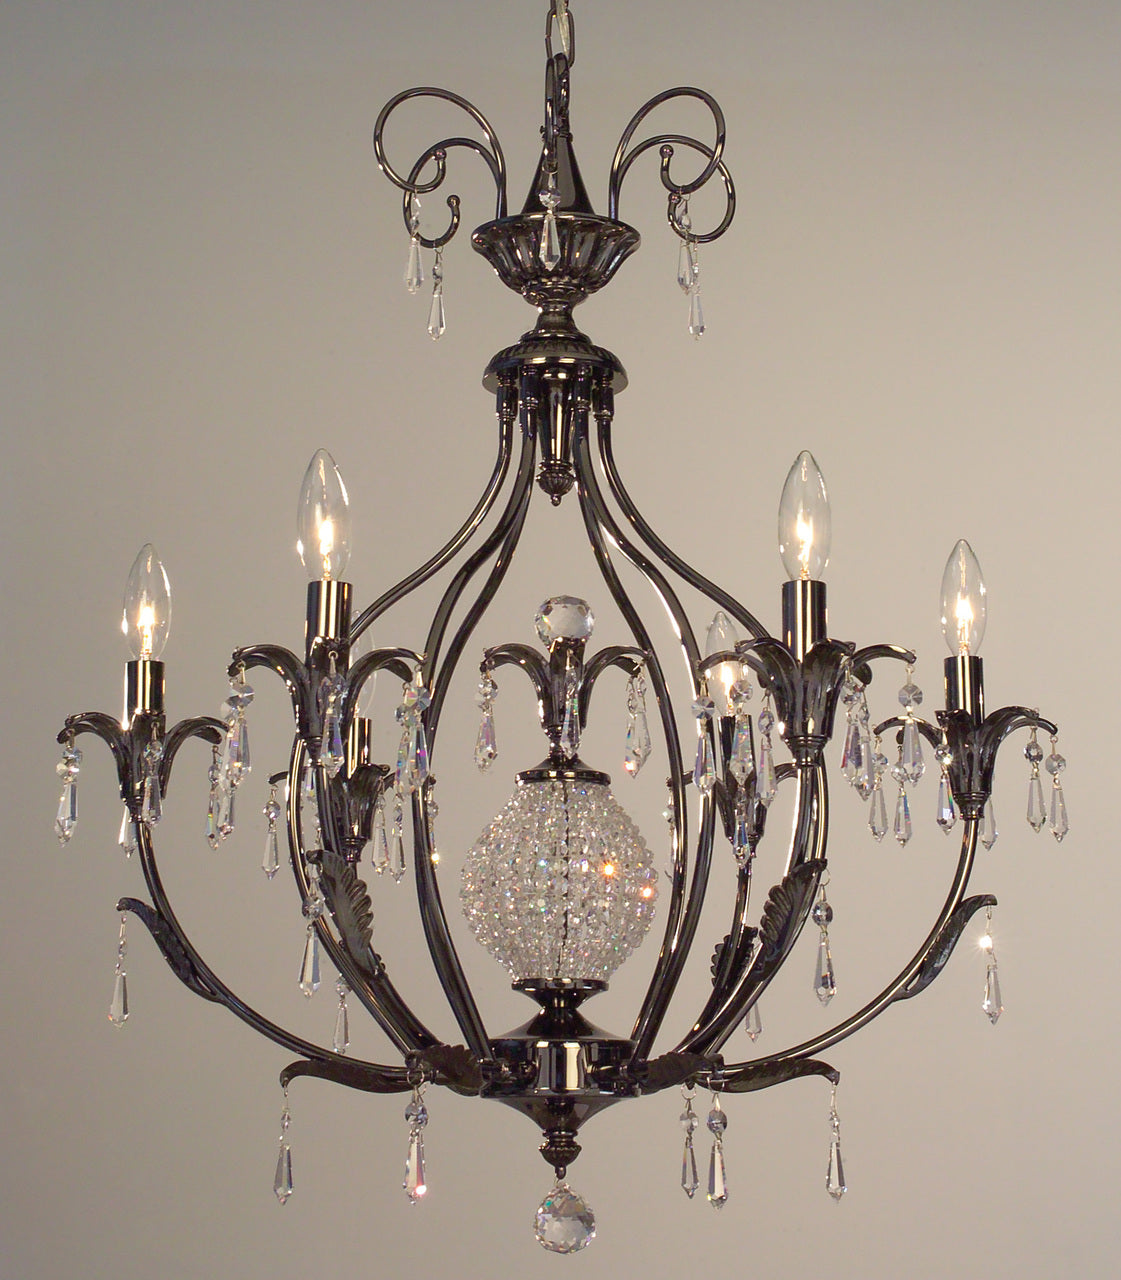 Classic Lighting 16118 ABR SMK Sharon Crystal Chandelier in Antique Brass